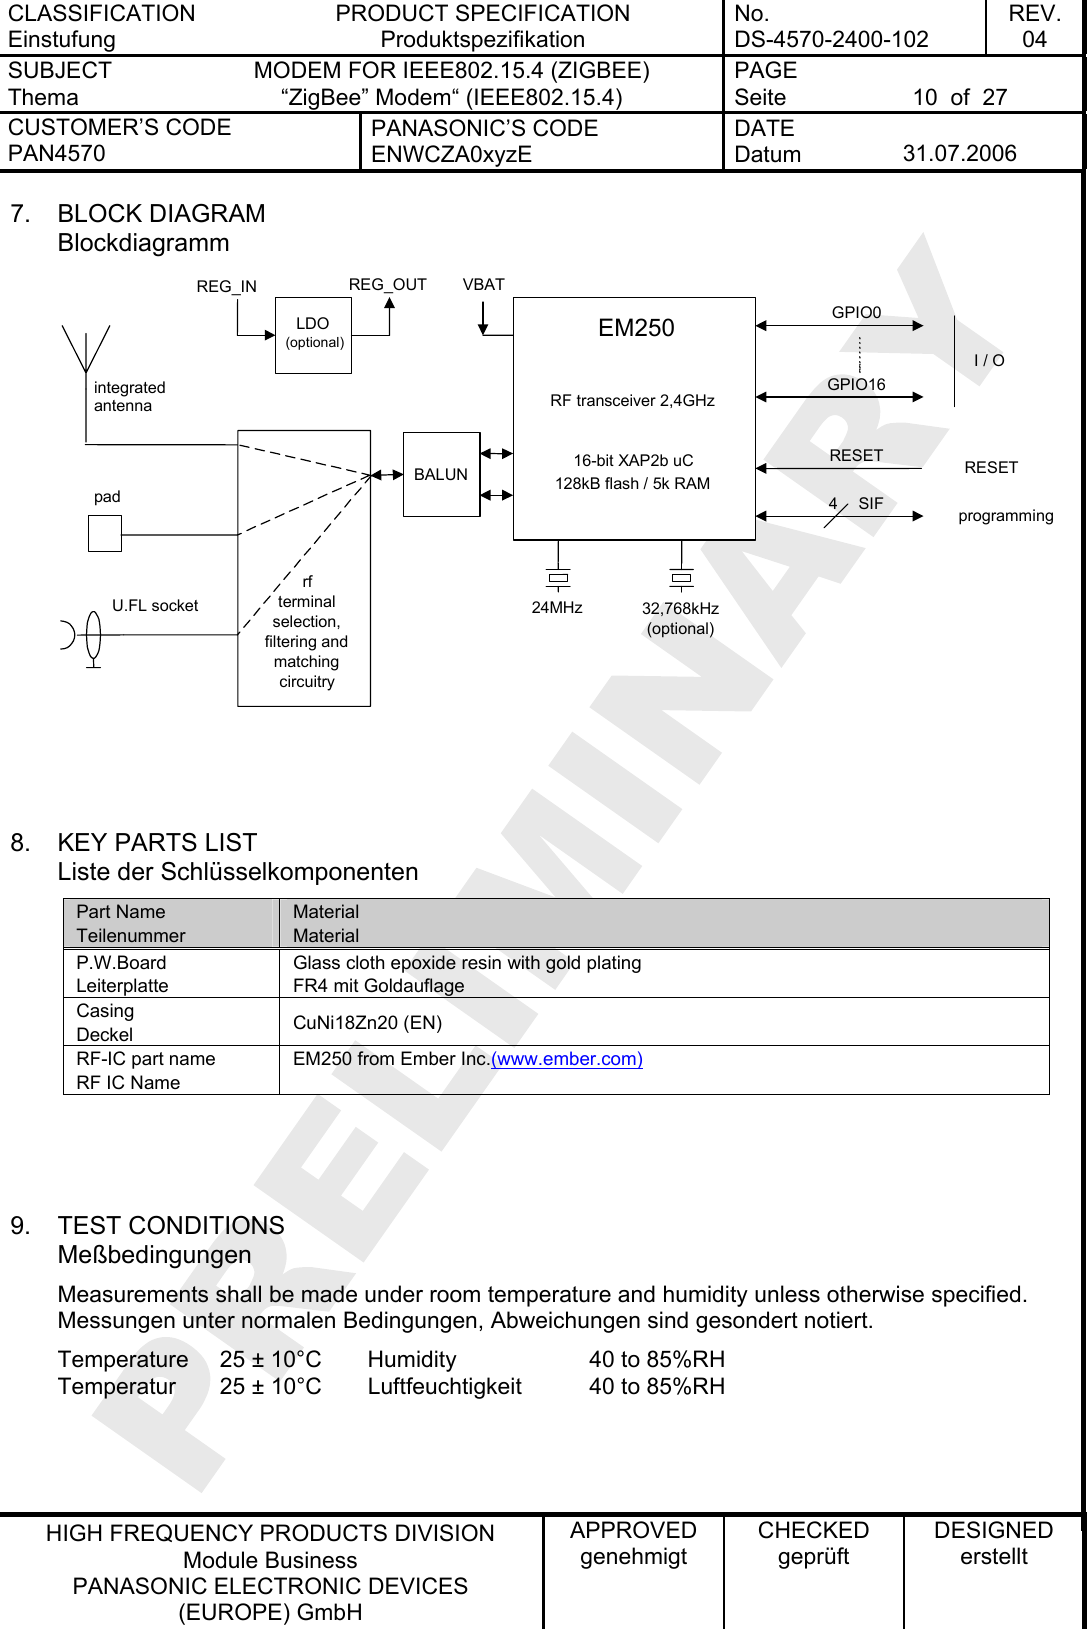 CLASSIFICATION Einstufung PRODUCT SPECIFICATION Produktspezifikation No. DS-4570-2400-102 REV. 04 SUBJECT Thema MODEM FOR IEEE802.15.4 (ZIGBEE) “ZigBee” Modem“ (IEEE802.15.4)   PAGE Seite  10  of  27 CUSTOMER’S CODE PAN4570 PANASONIC’S CODE ENWCZA0xyzE DATE Datum  31.07.2006   HIGH FREQUENCY PRODUCTS DIVISION Module Business PANASONIC ELECTRONIC DEVICES  (EUROPE) GmbH APPROVED genehmigt CHECKED geprüft DESIGNED erstellt 7. BLOCK DIAGRAM Blockdiagramm  24MHz 32,768kHz(optional)EM250RF transceiver 2,4GHz16-bit XAP2b uC128kB flash / 5k RAMGPIO0 GPIO16 I / Oprogramming4 SIF LDO (optional) VBATREG_IN REG_OUTRESET RESETBALUNintegrated antenna pad U.FL socket rf terminal selection, filtering and matching circuitry    8.  KEY PARTS LIST Liste der Schlüsselkomponenten Part Name Teilenummer Material Material P.W.Board Leiterplatte Glass cloth epoxide resin with gold plating  FR4 mit Goldauflage Casing Deckel  CuNi18Zn20 (EN) RF-IC part name RF IC Name EM250 from Ember Inc.(www.ember.com)     9. TEST CONDITIONS Meßbedingungen Measurements shall be made under room temperature and humidity unless otherwise specified. Messungen unter normalen Bedingungen, Abweichungen sind gesondert notiert. Temperature  25 ± 10°C  Humidity    40 to 85%RH Temperatur  25 ± 10°C  Luftfeuchtigkeit  40 to 85%RH  